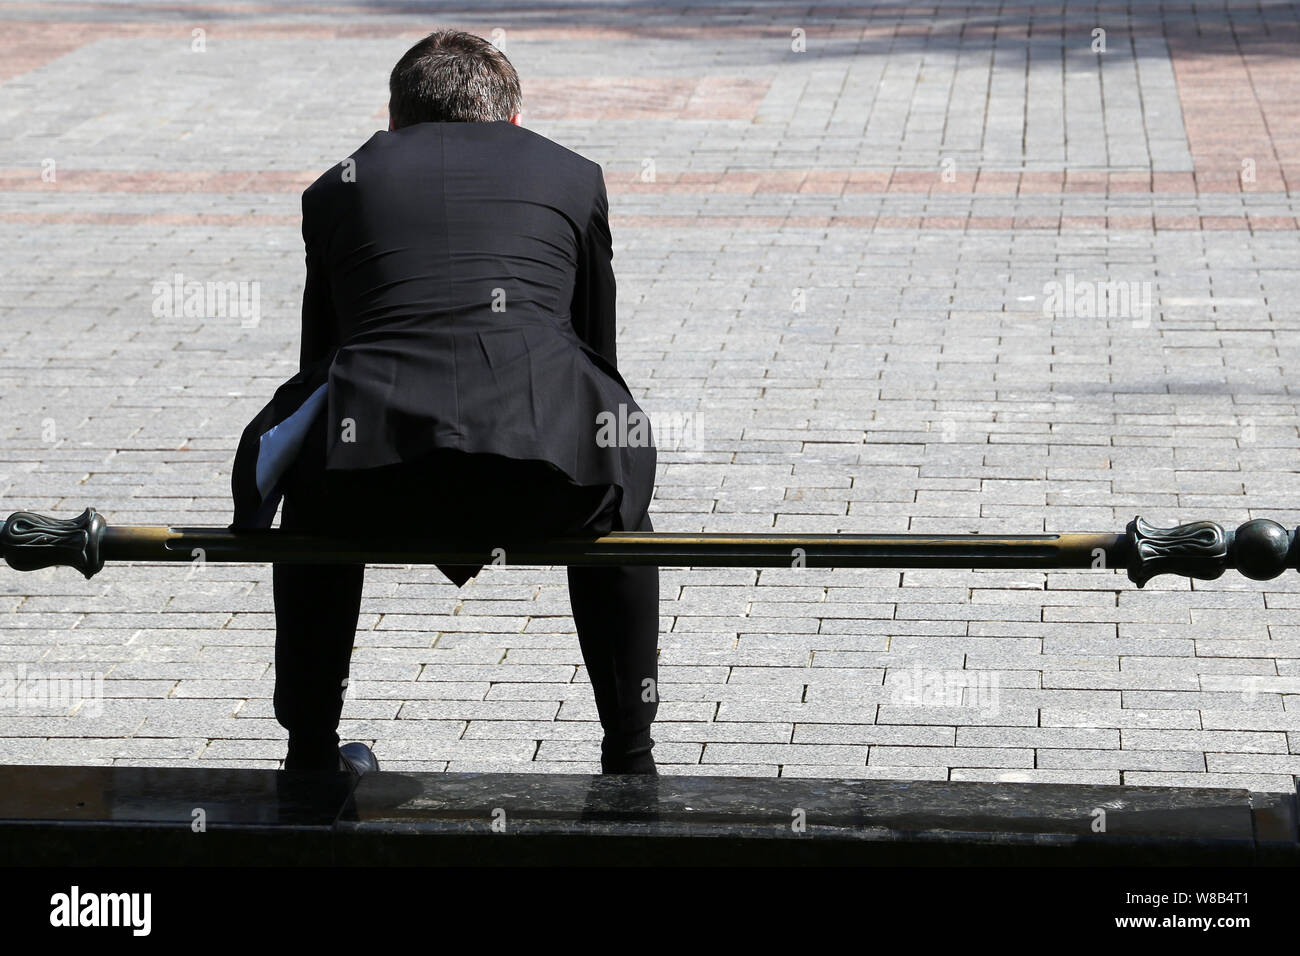 Man in a black business suit sitting on a railing on a city street, rear view. Concept of businessman, dismissed office worker, official, government Stock Photo